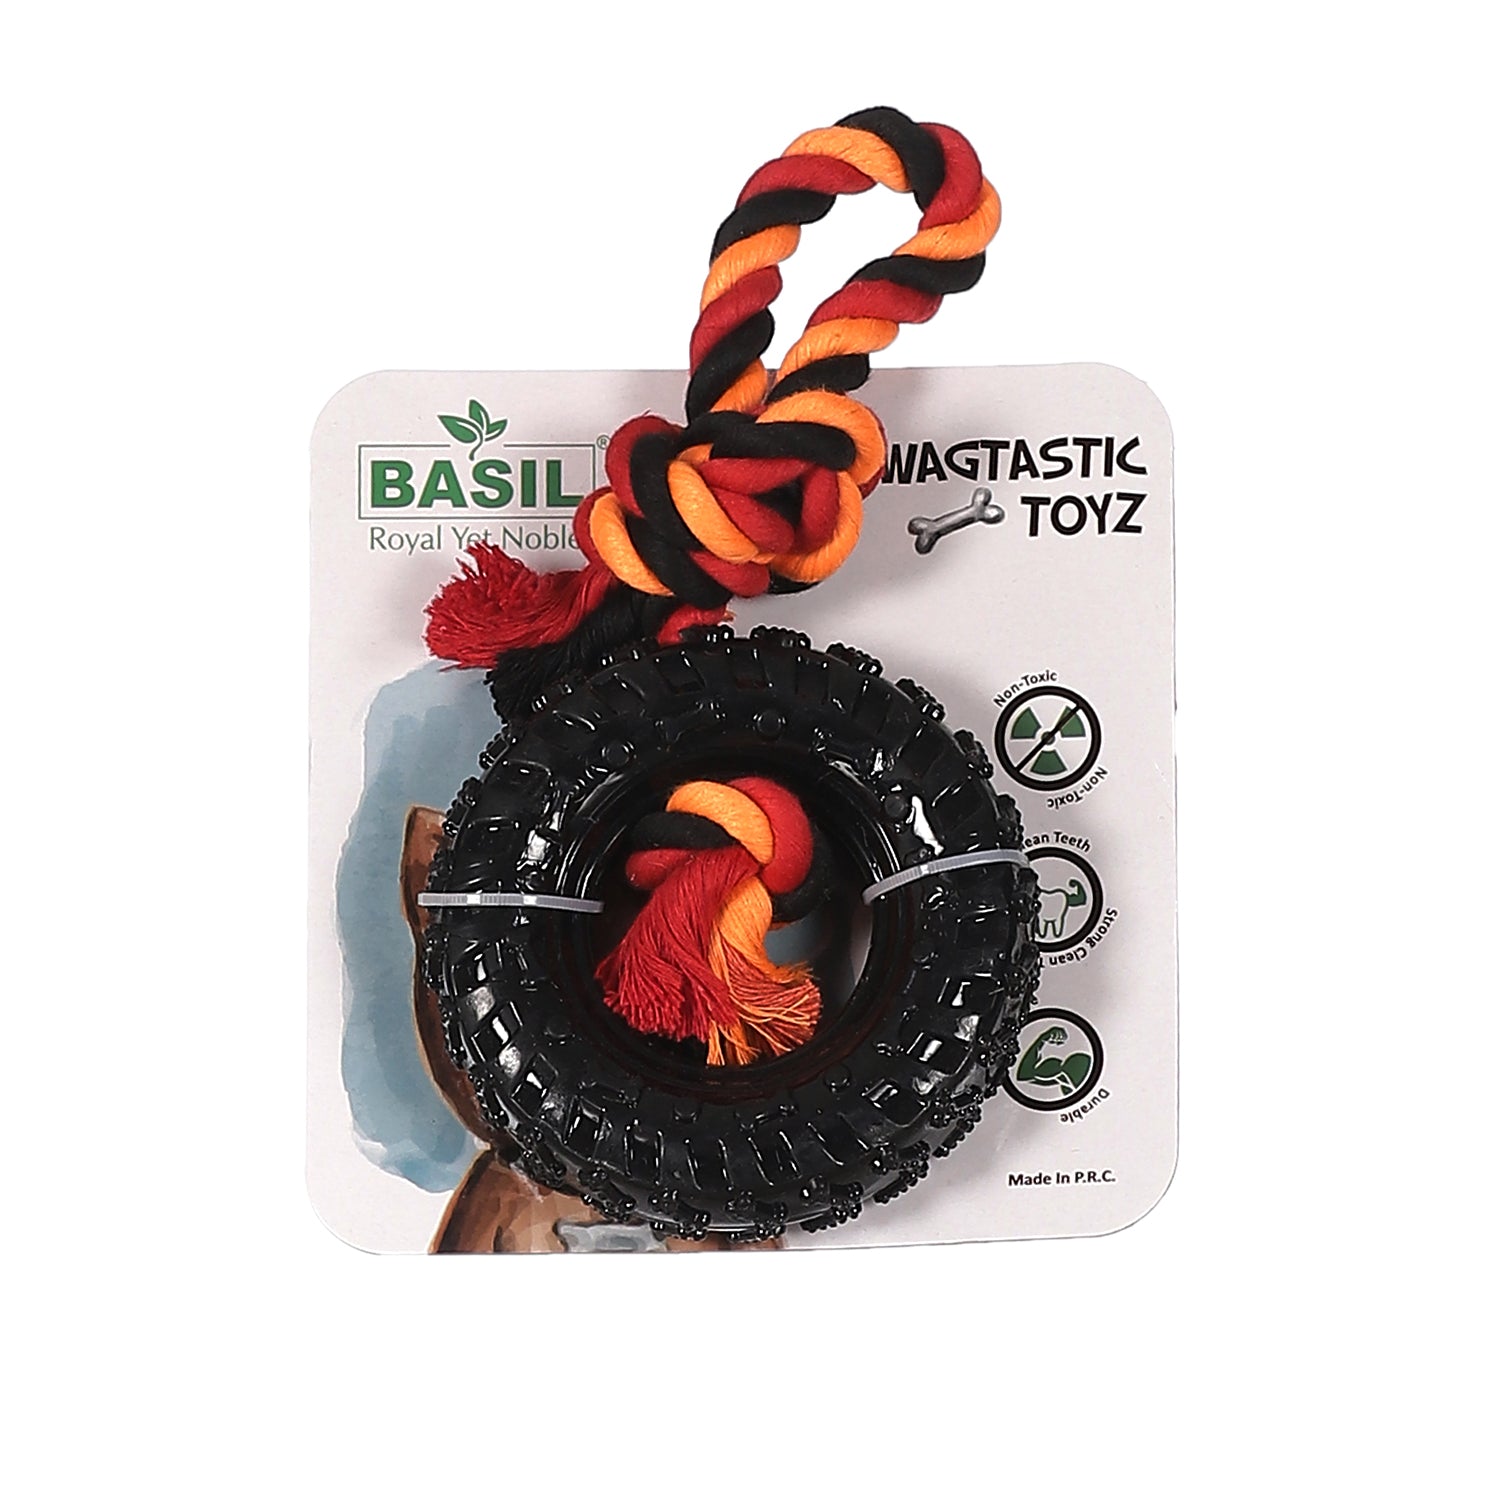 Basil Wagtastic Toyz Toy Tire With Rope